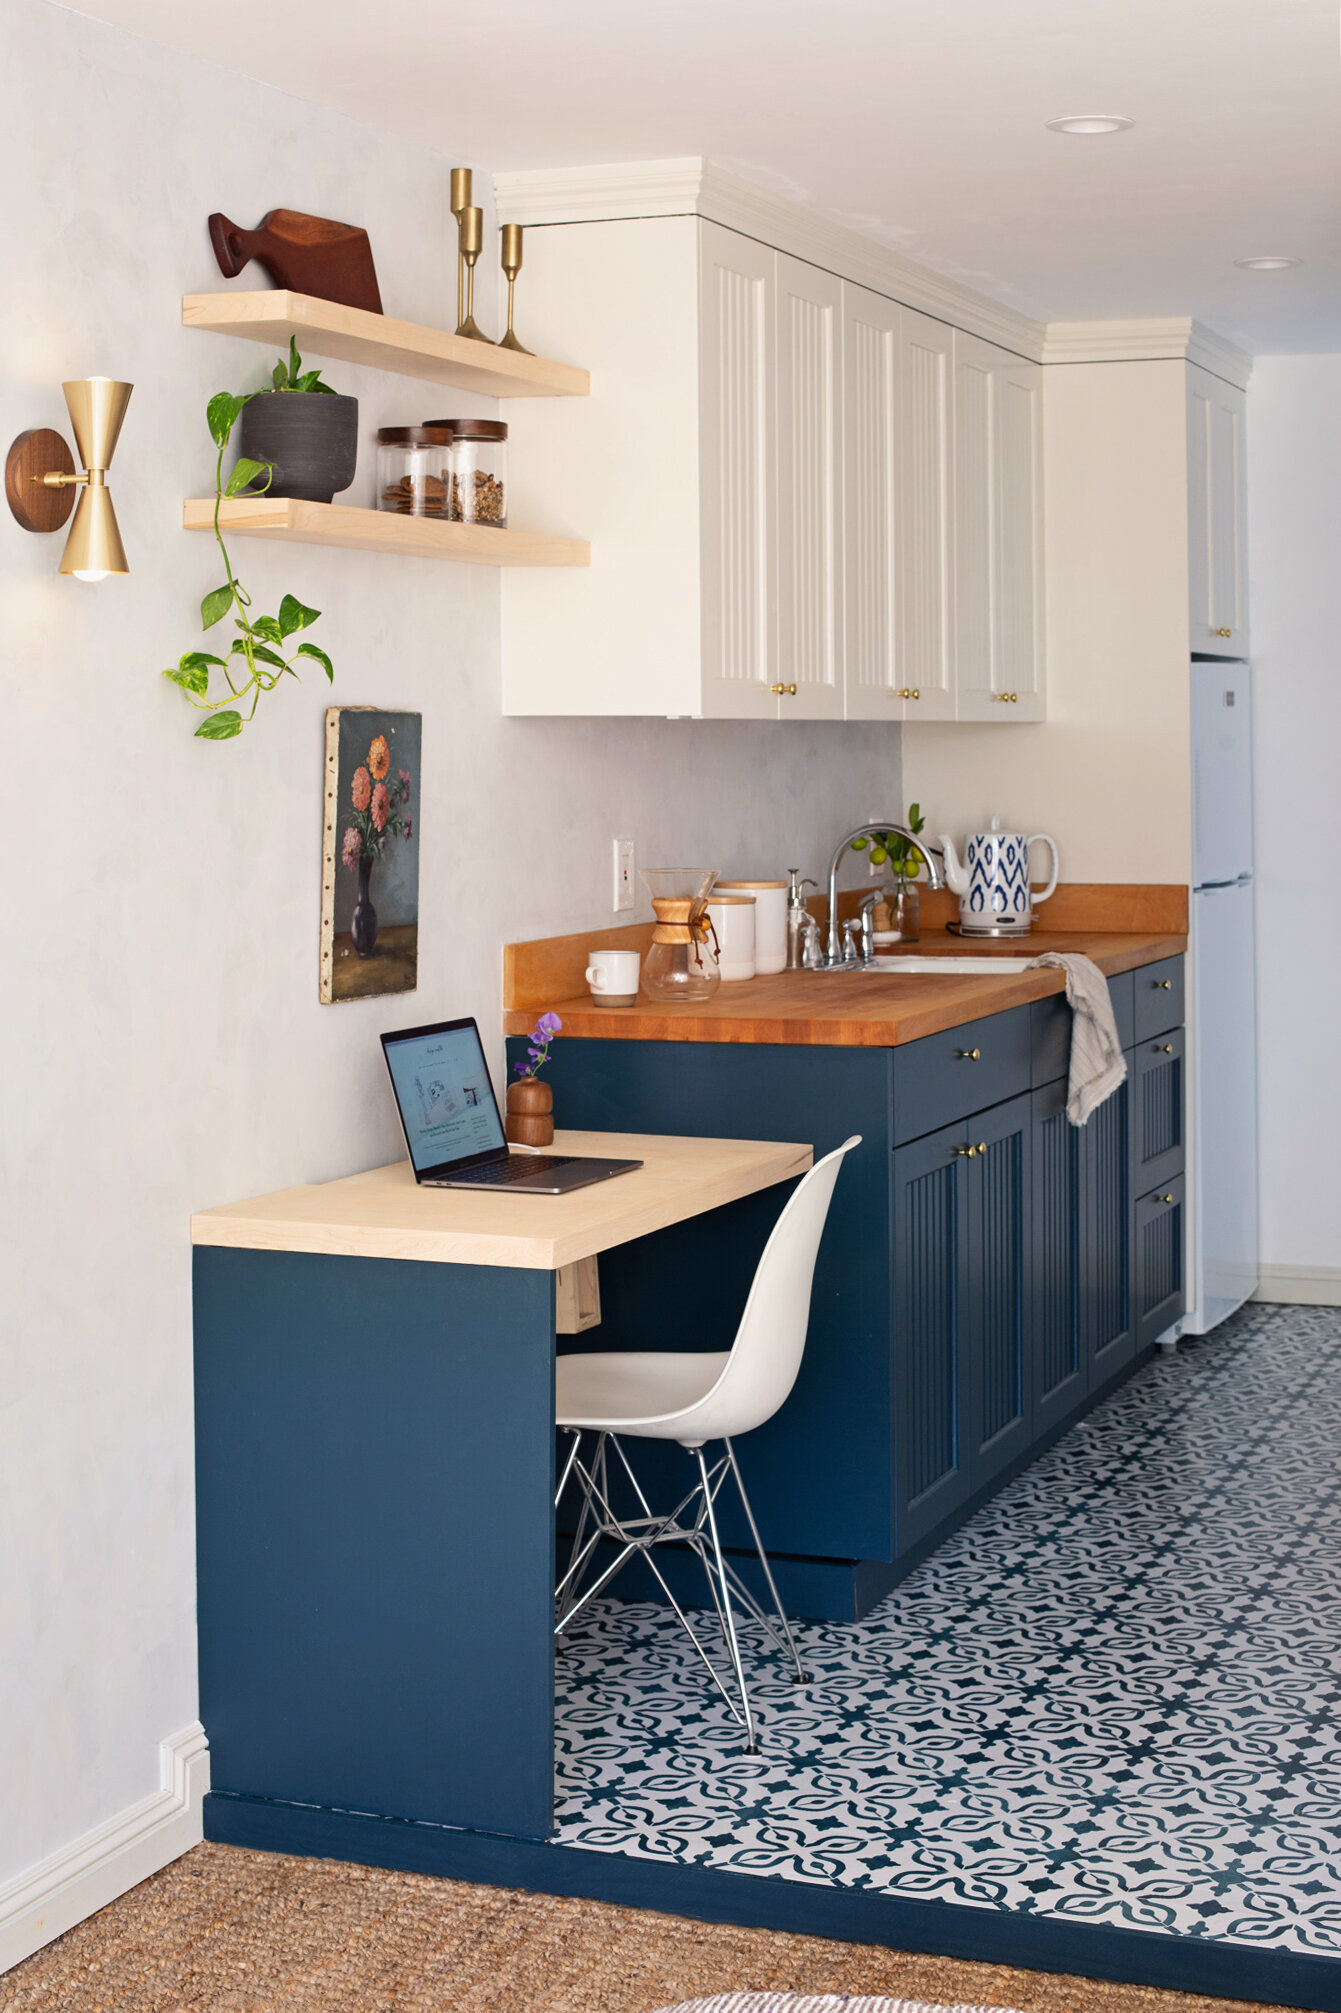  The navy from the cabinets and the pattern on the floor are the same shade for a cohesive feel. 